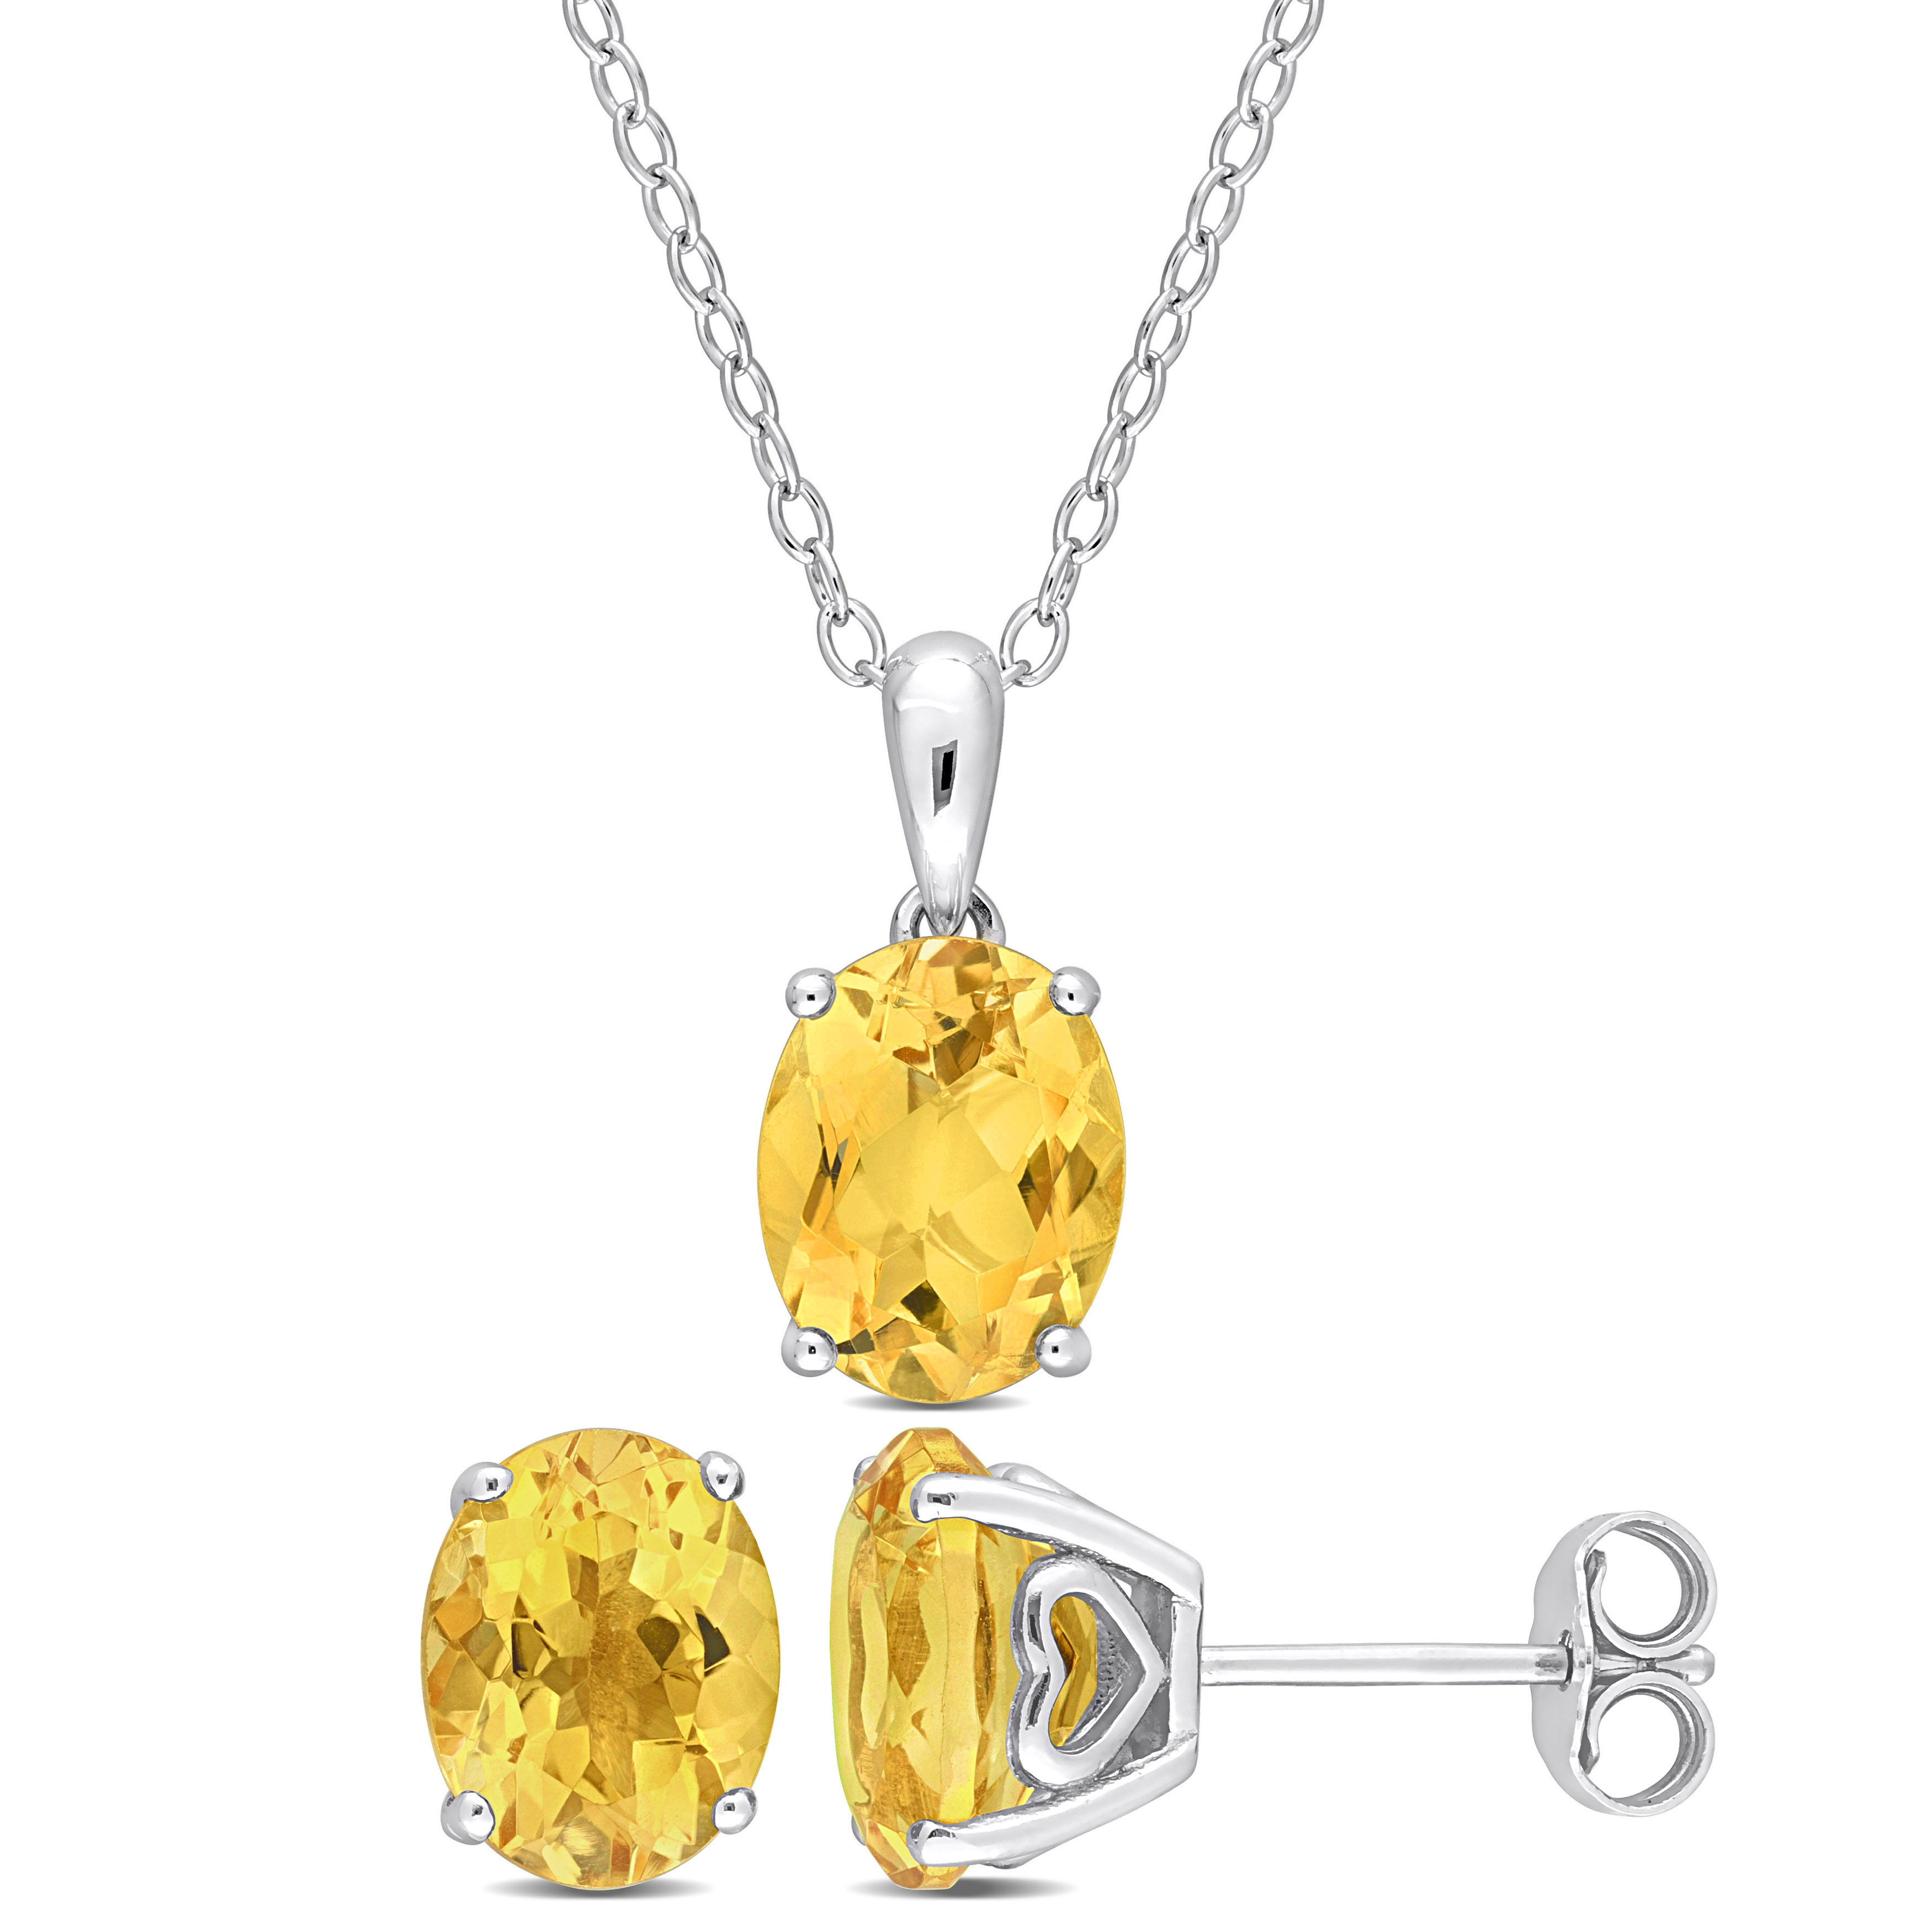 4 7/8 CT TGW Oval Citrine 2-Piece Set of Pendant with Chain and Earrings in Sterling Silver